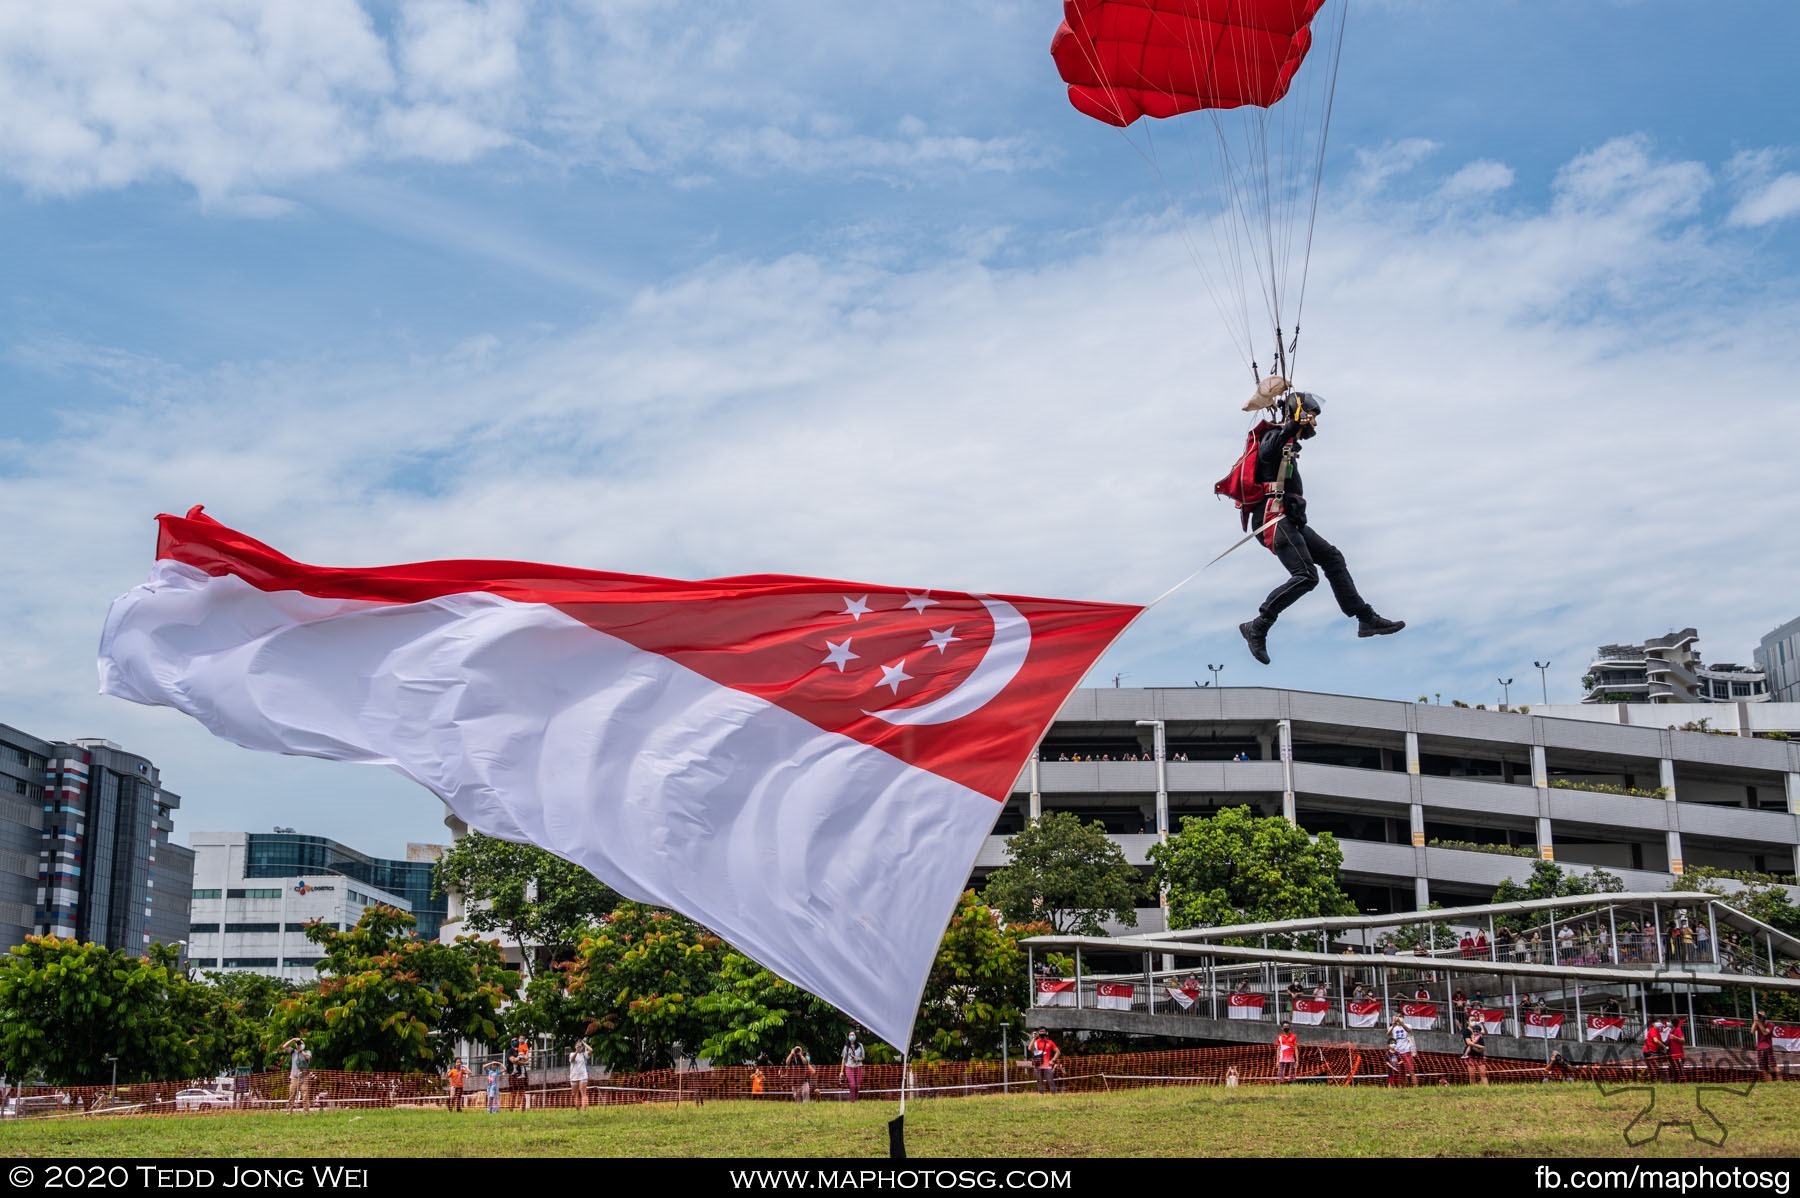 A Red Lion with the State Flag comes in for a landing after their freefall descent.